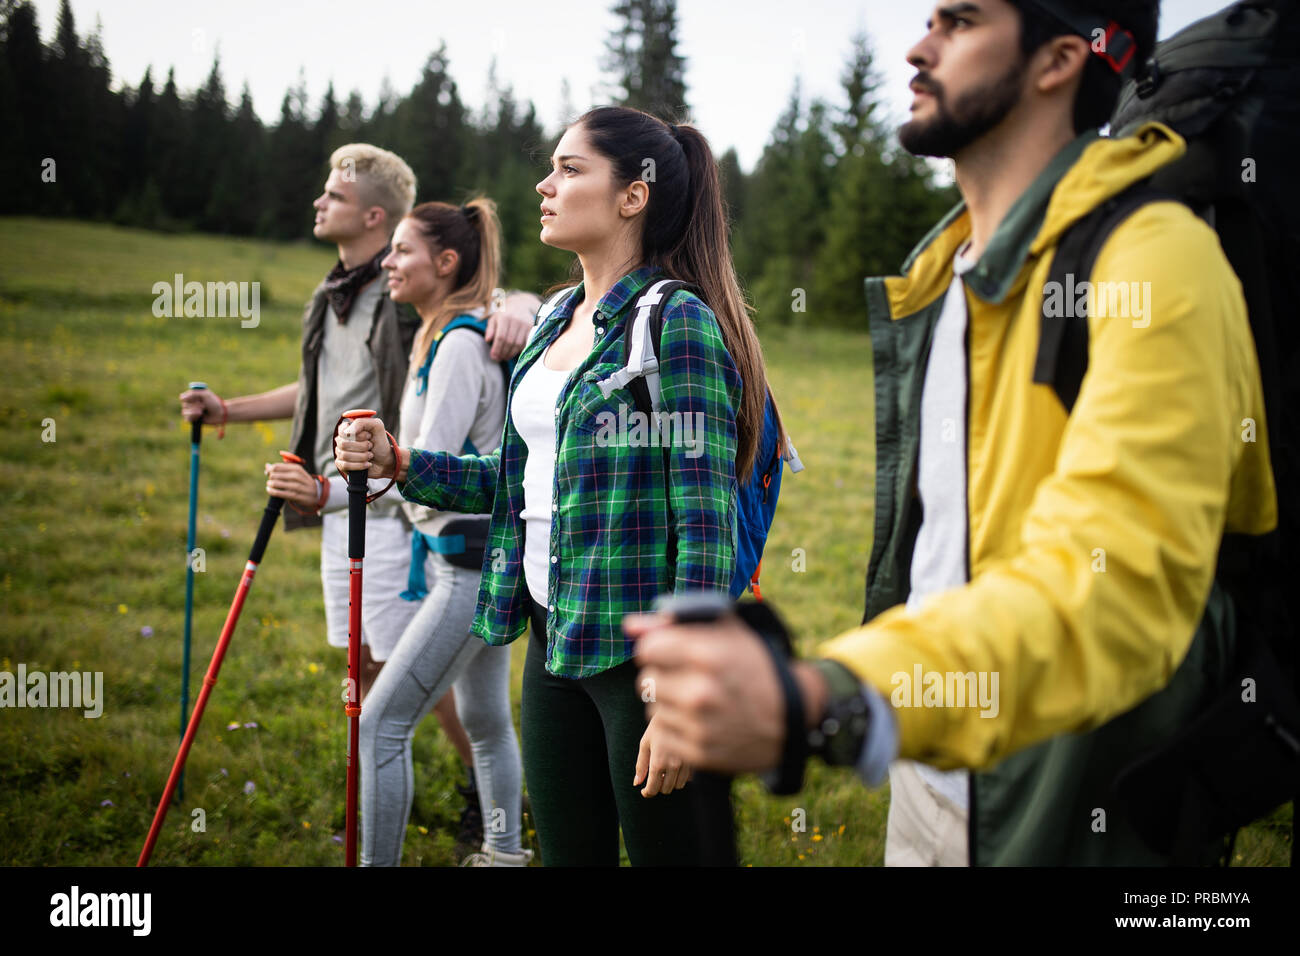 Group of hikers with backpacks and sticks walking on mountain. Friends making an excursion Stock Photo